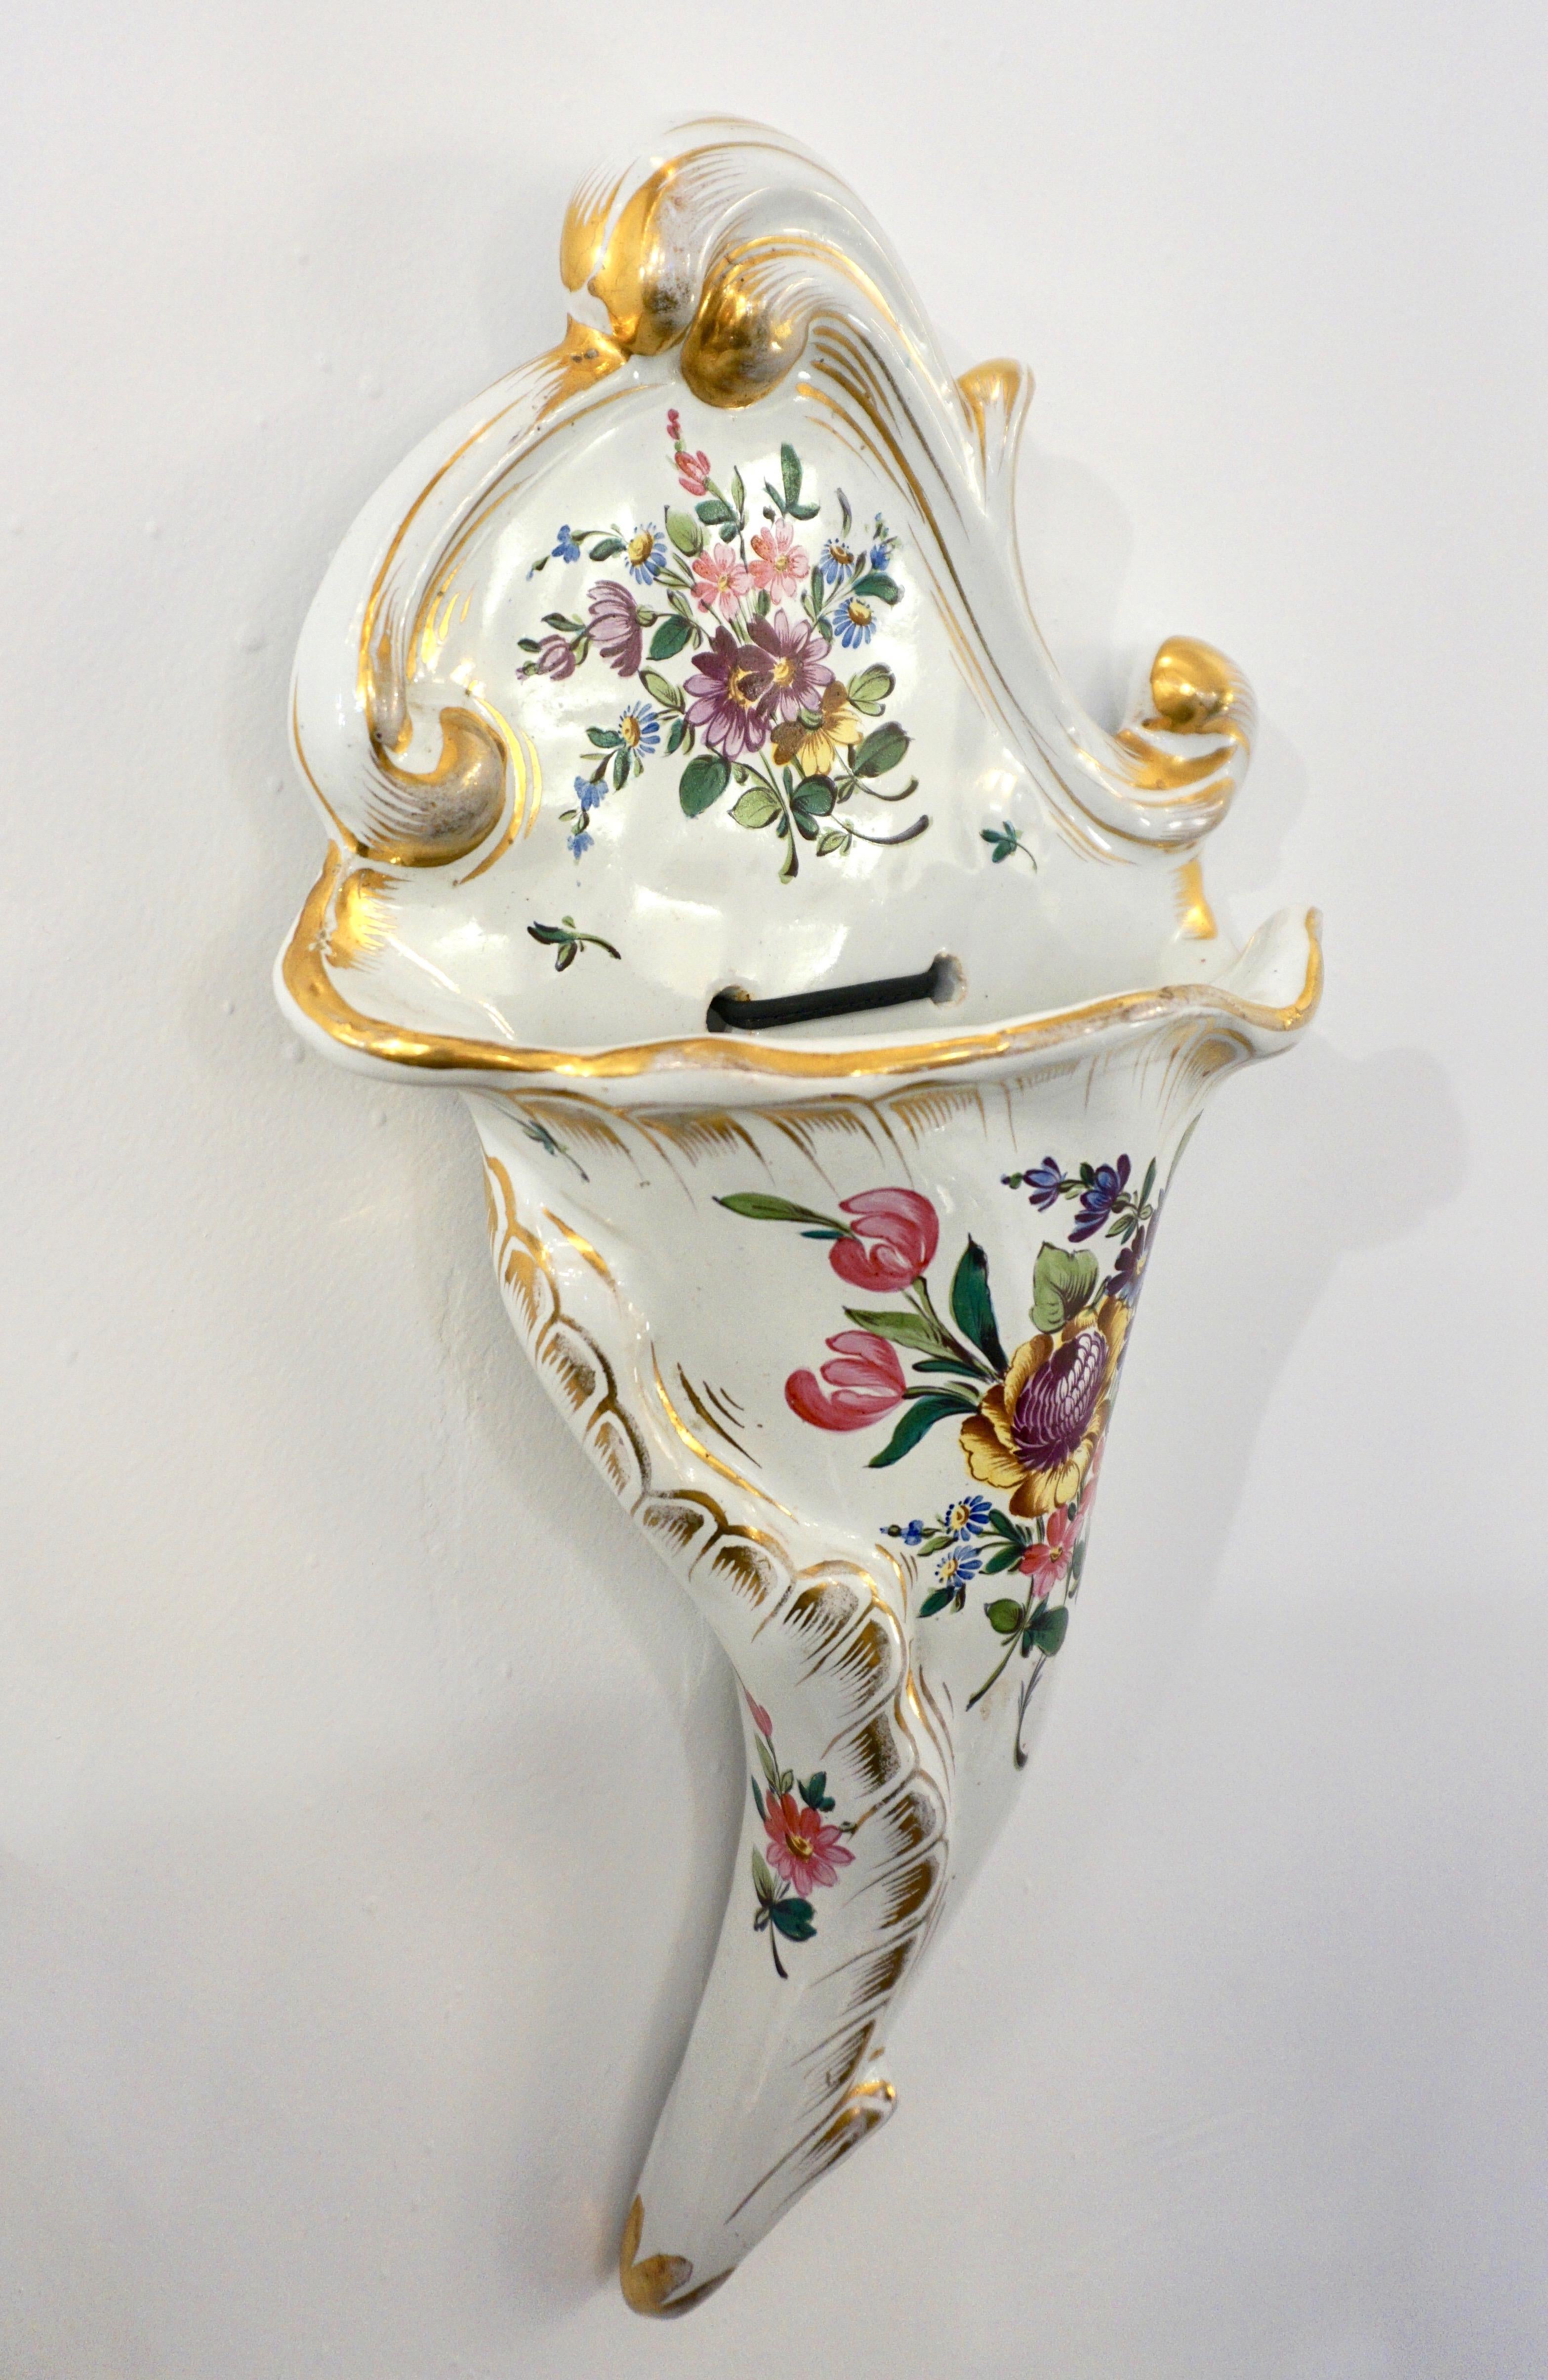 A delightful cornucopia-shaped Faience wall decoration signed Angoulême, a flower holder wall pocket in ivory white tin-glazed earthenware, hand-painted with delicate flowers and gold accents, with the typical 19th-century romanticism of the time